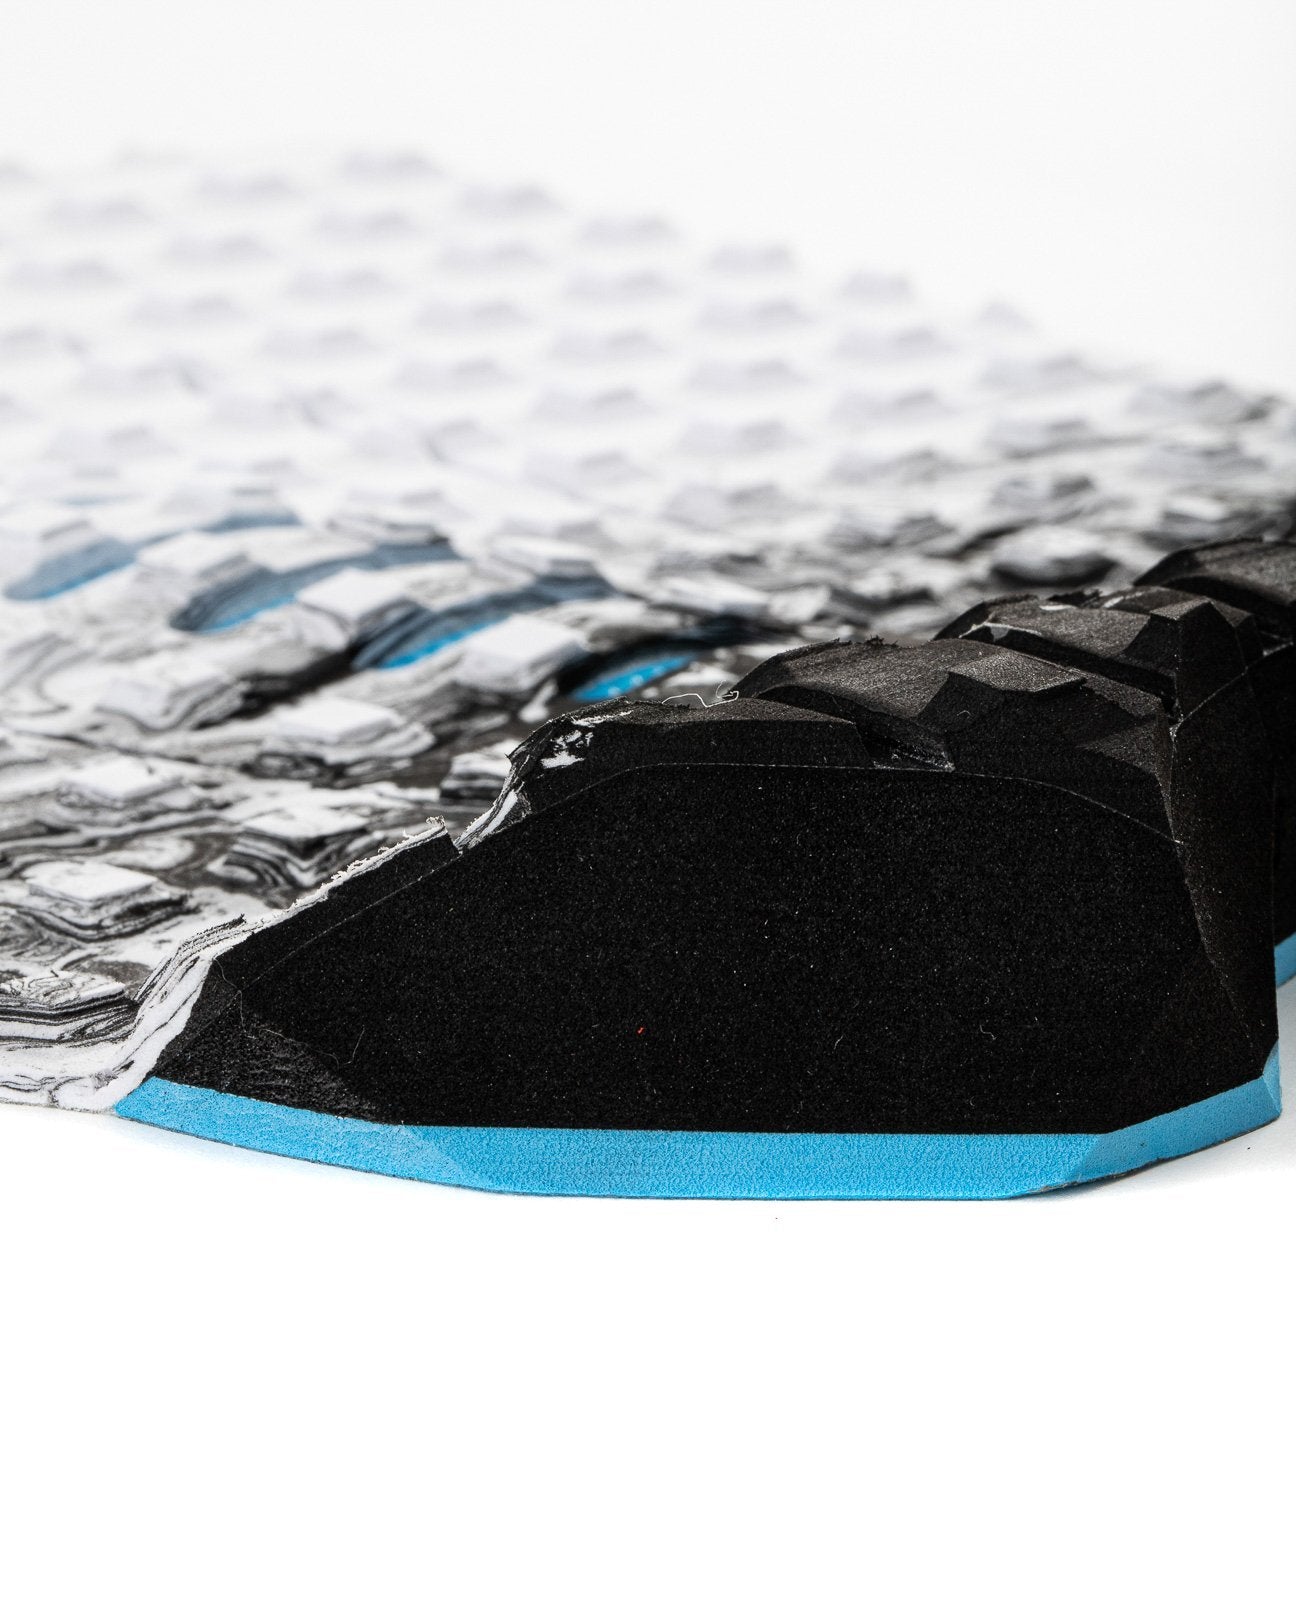 Mick Fanning Signature Traction Pad for Performance – Creatures of 